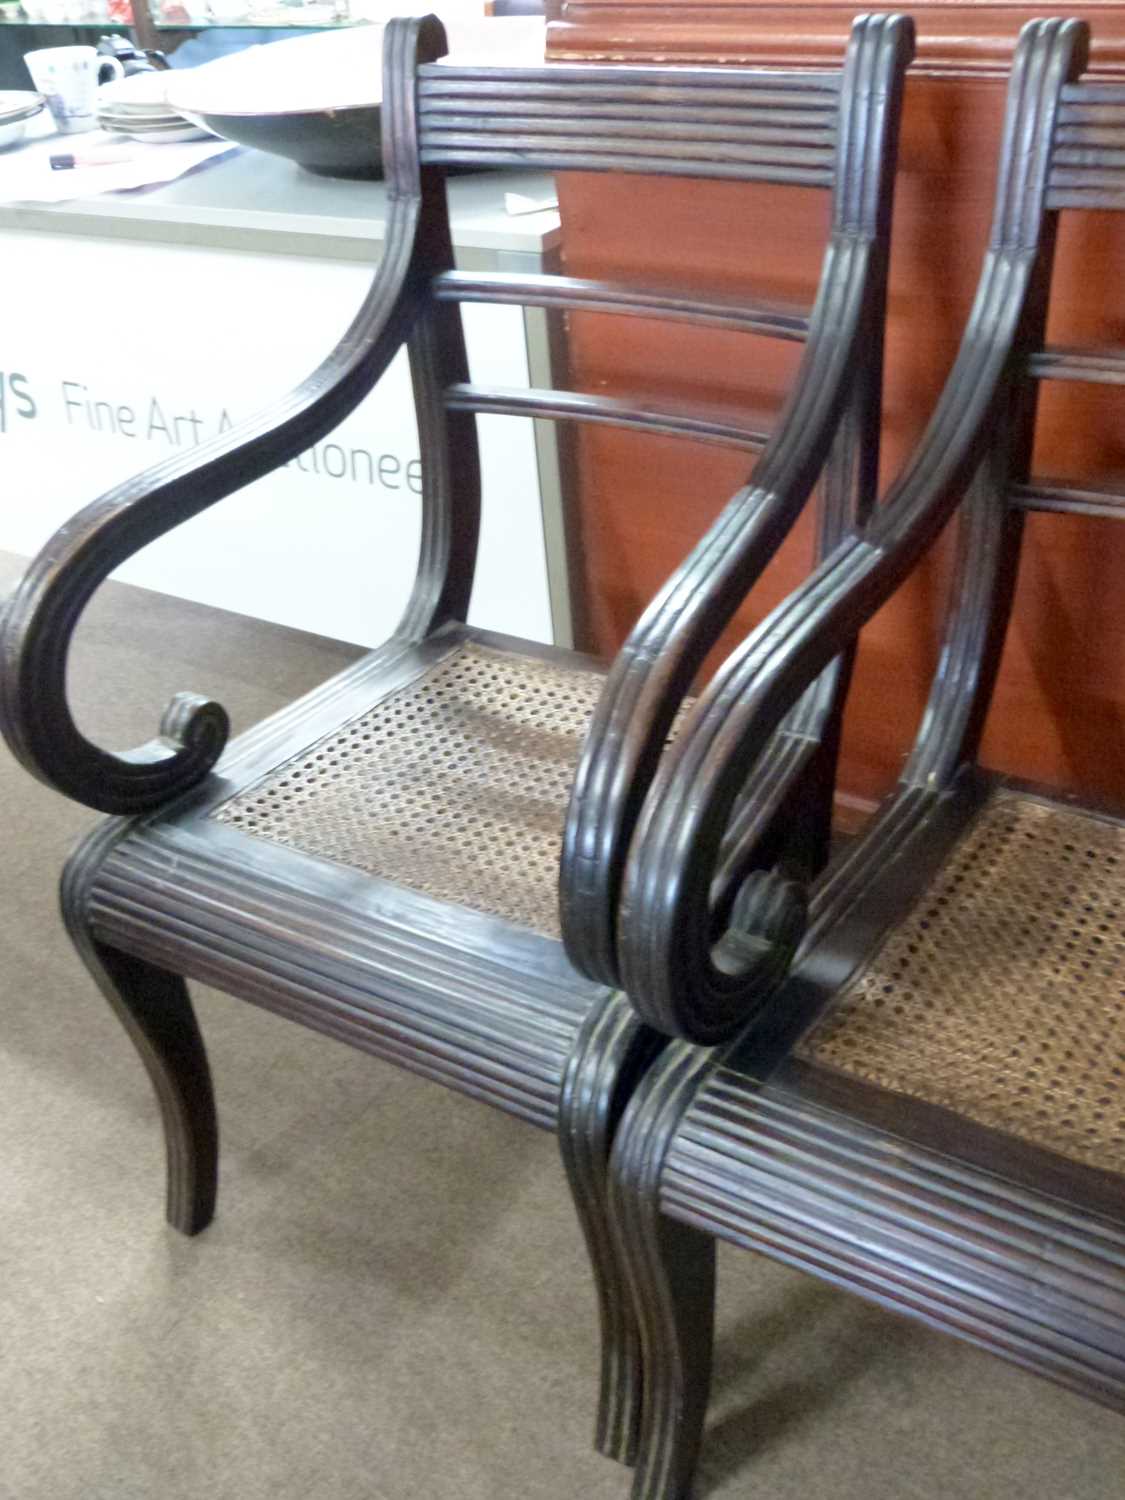 Pair of Georgian mahogany scroll arm chairs with cane seats and sabre type front legs decorated - Image 2 of 4